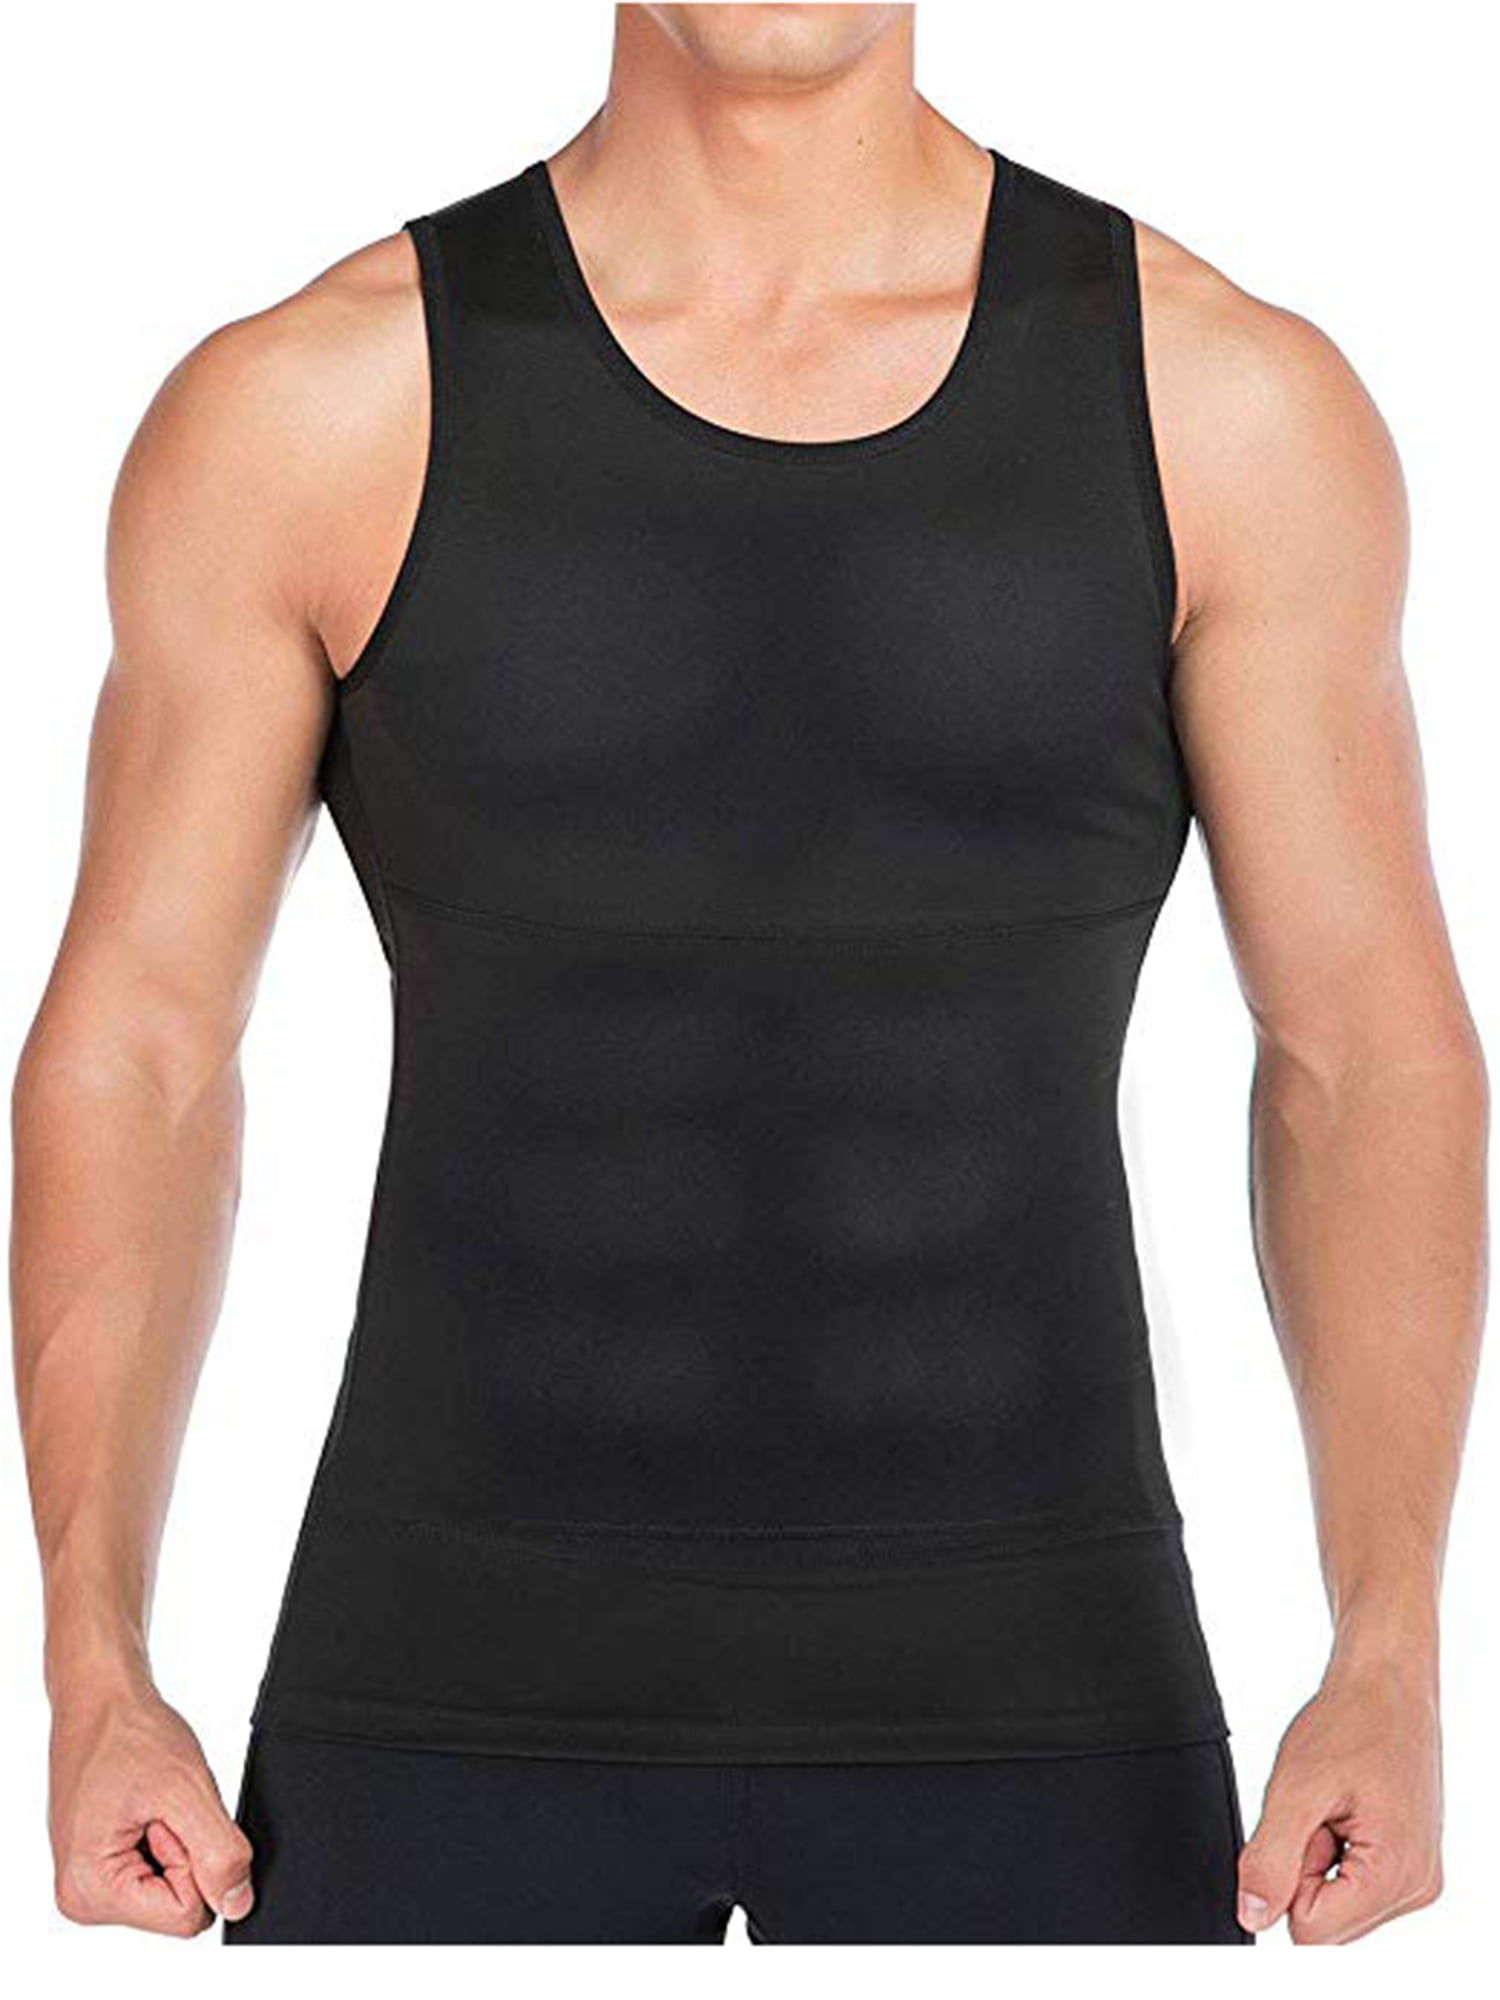 BALEAF Mens Sleeveless Compression Shirt Dry Cool Muscle Tank Tops Workout Undershirt